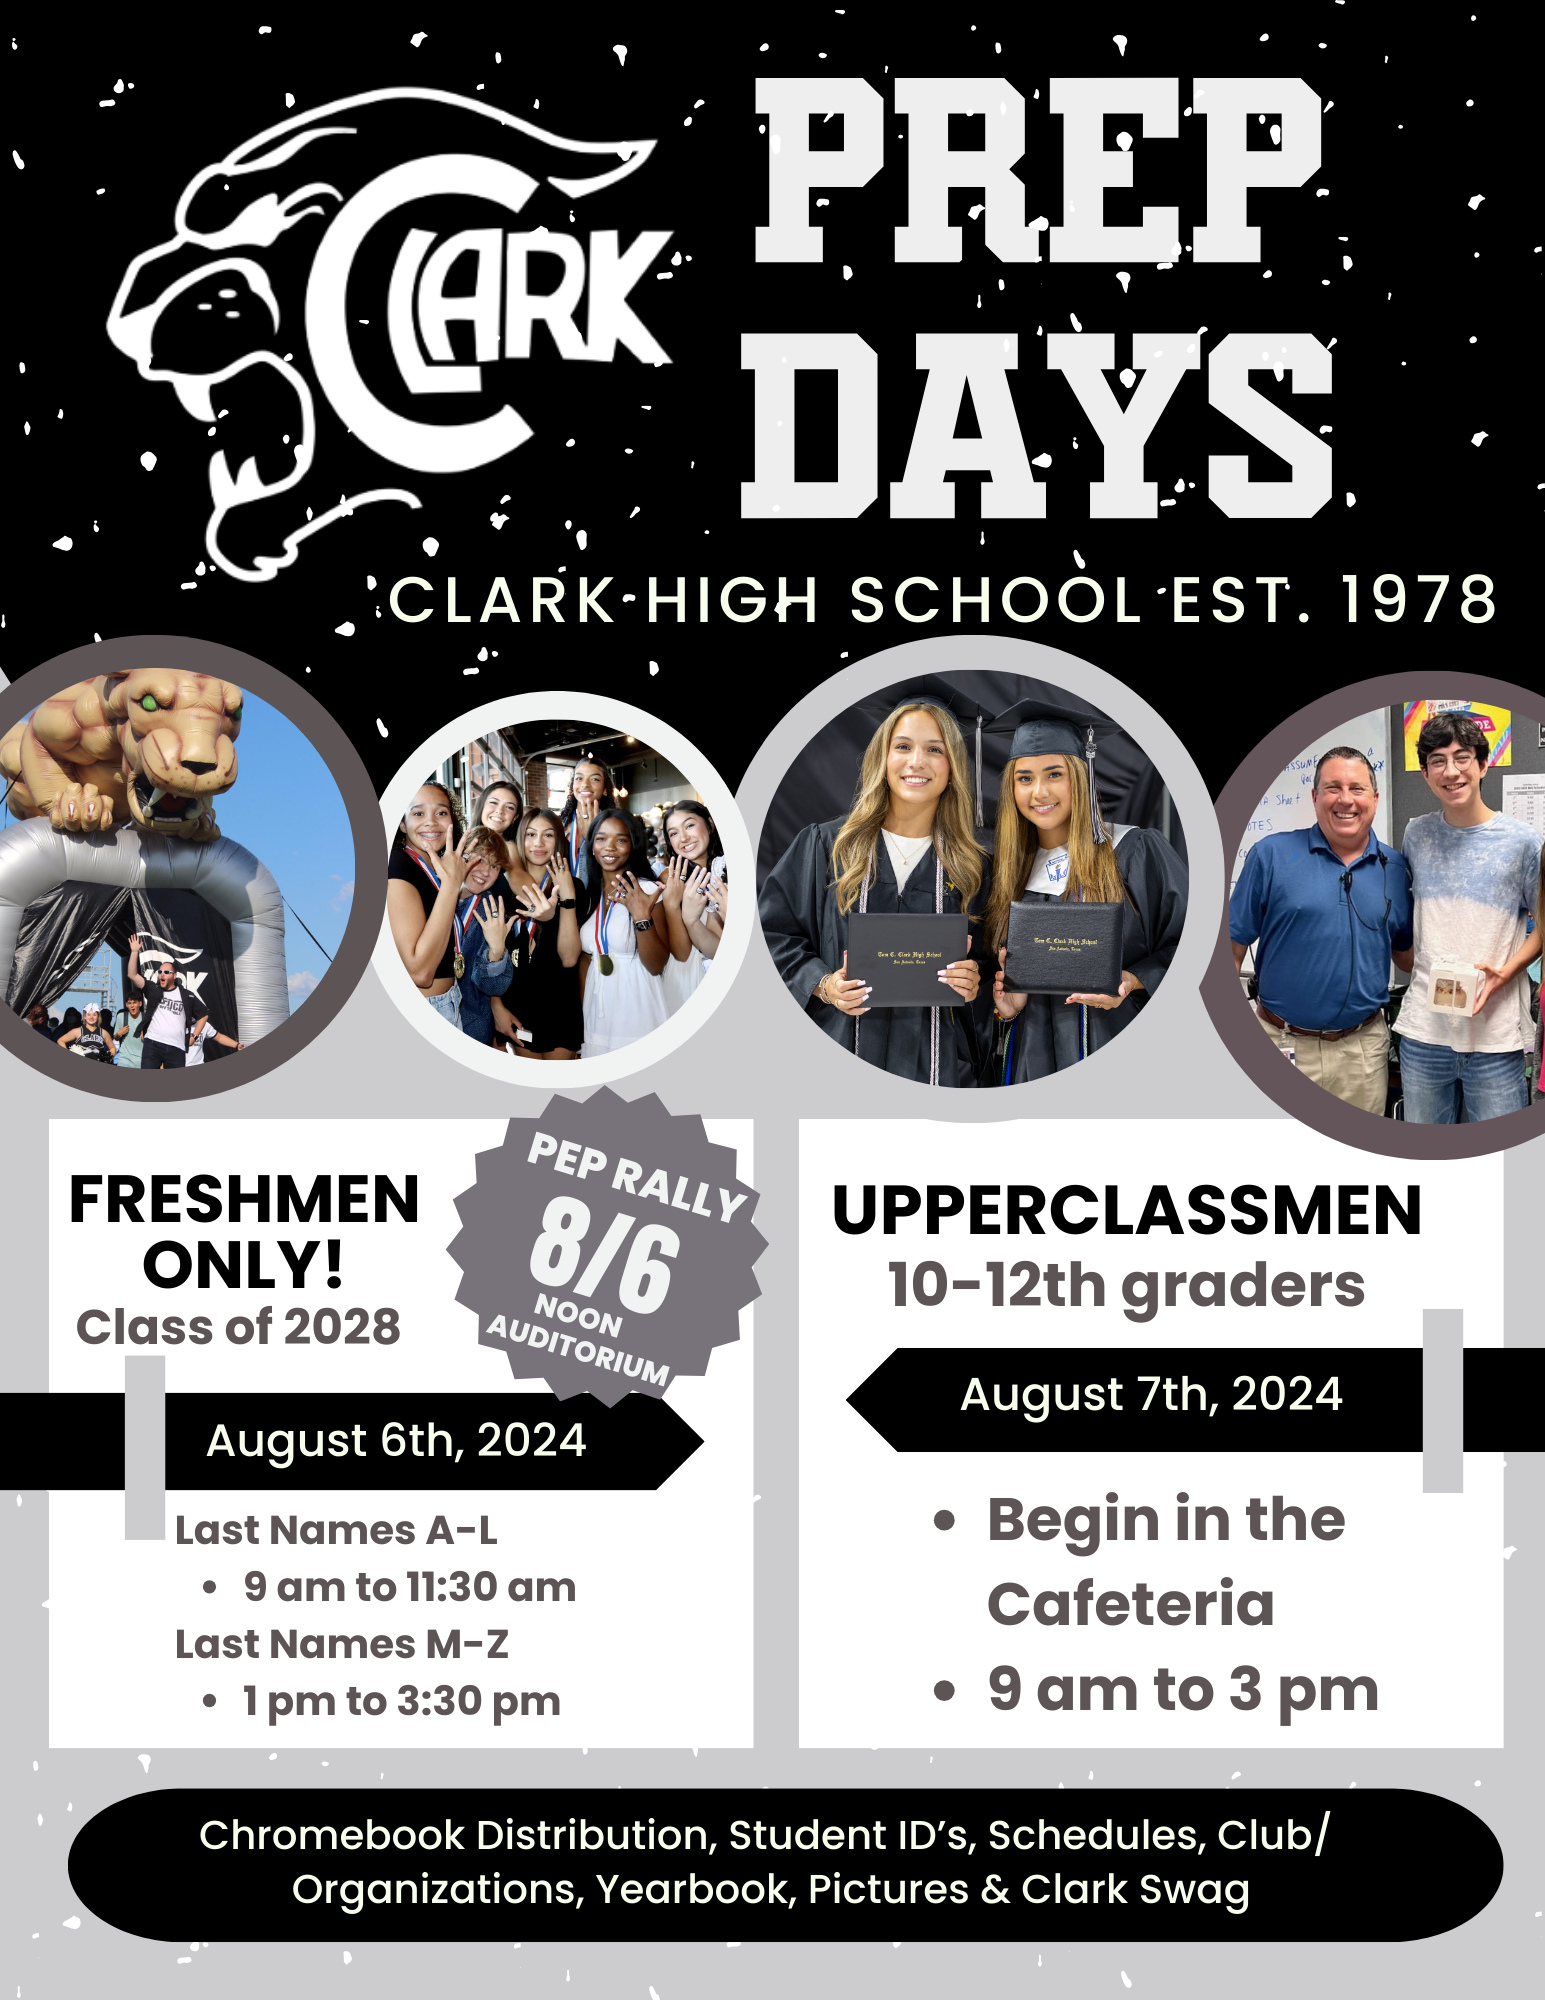 Flyer with Prep Days Information